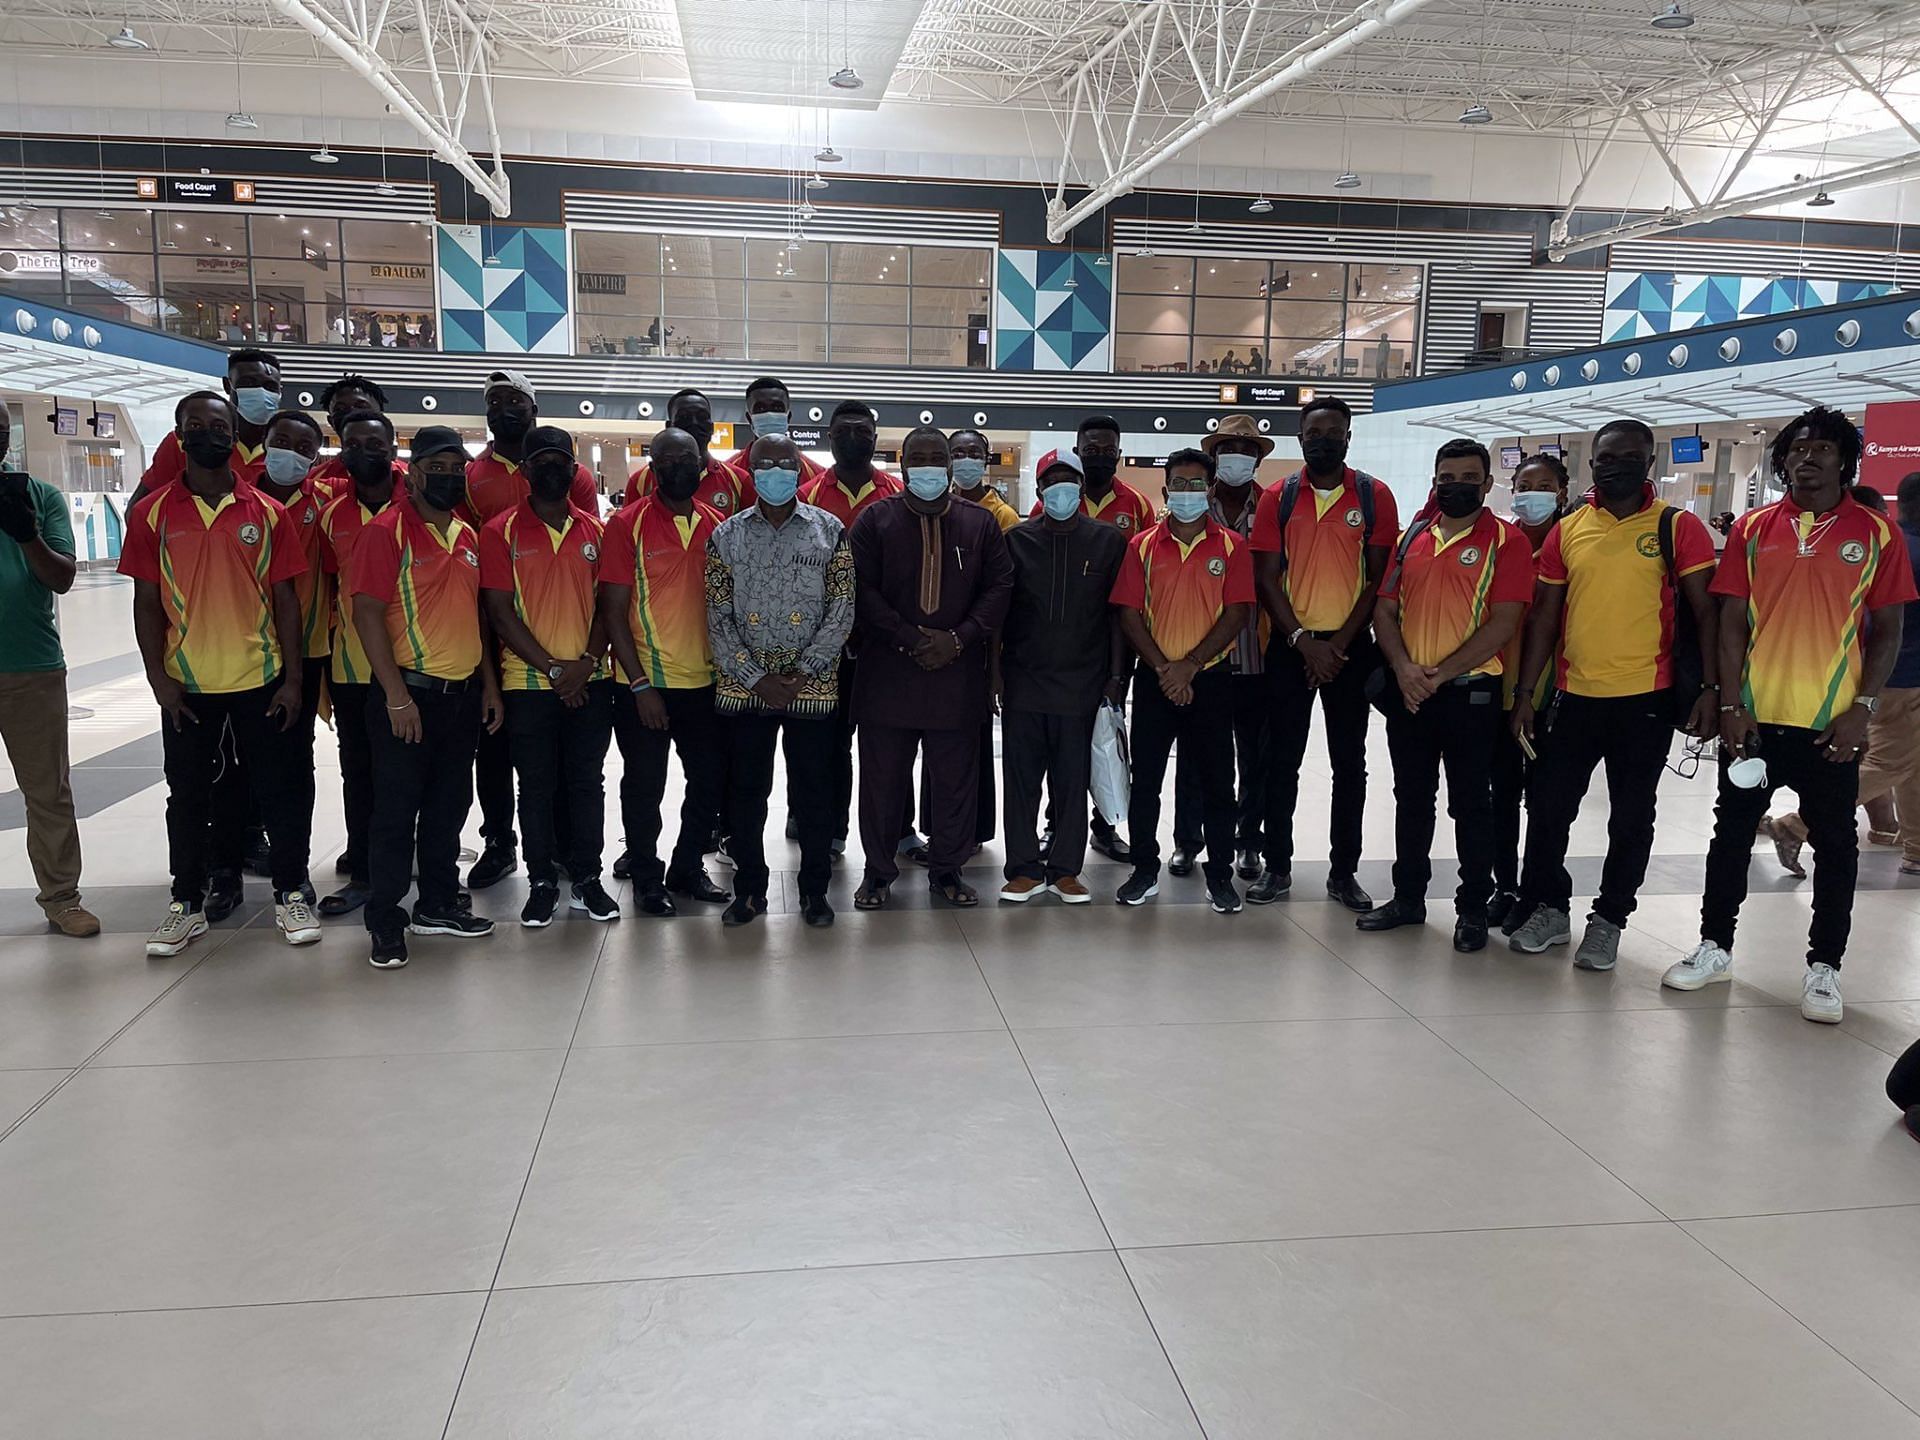 The Ghana team strikes a pose at the airport. (Image Credits: Twitter)